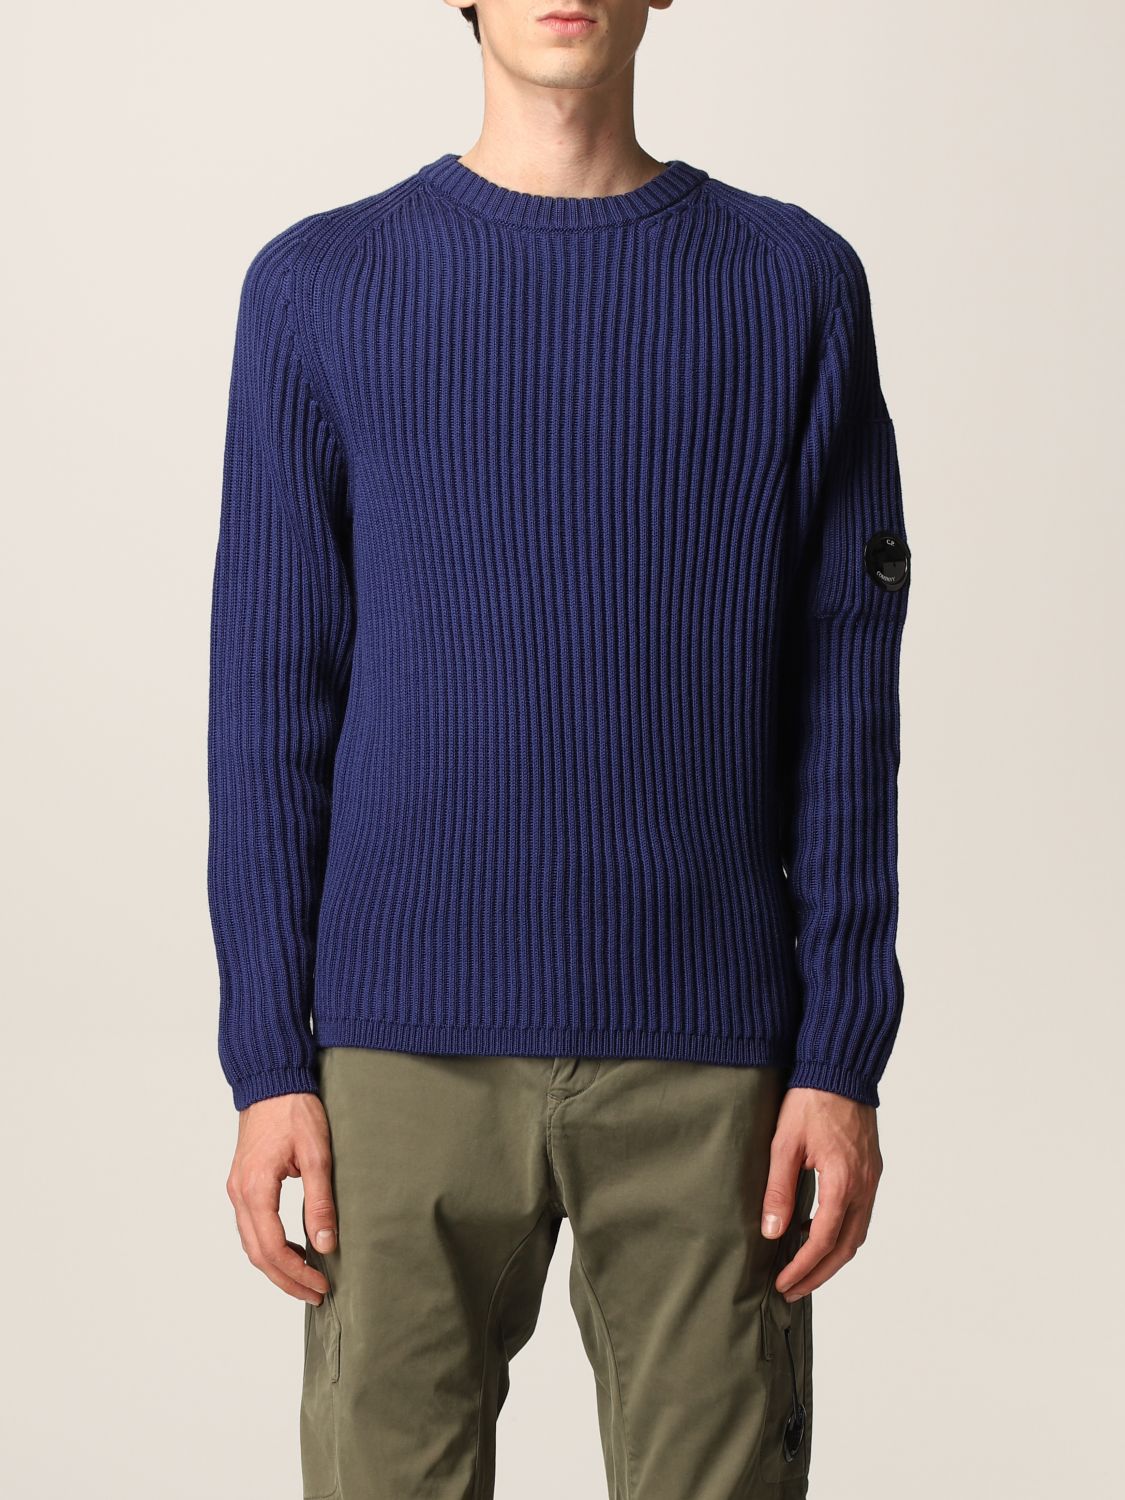 Notebook Peer Berucht C.P. COMPANY: sweater for man - Blue | C.p. Company sweater  11CMKN181A005292A online on GIGLIO.COM